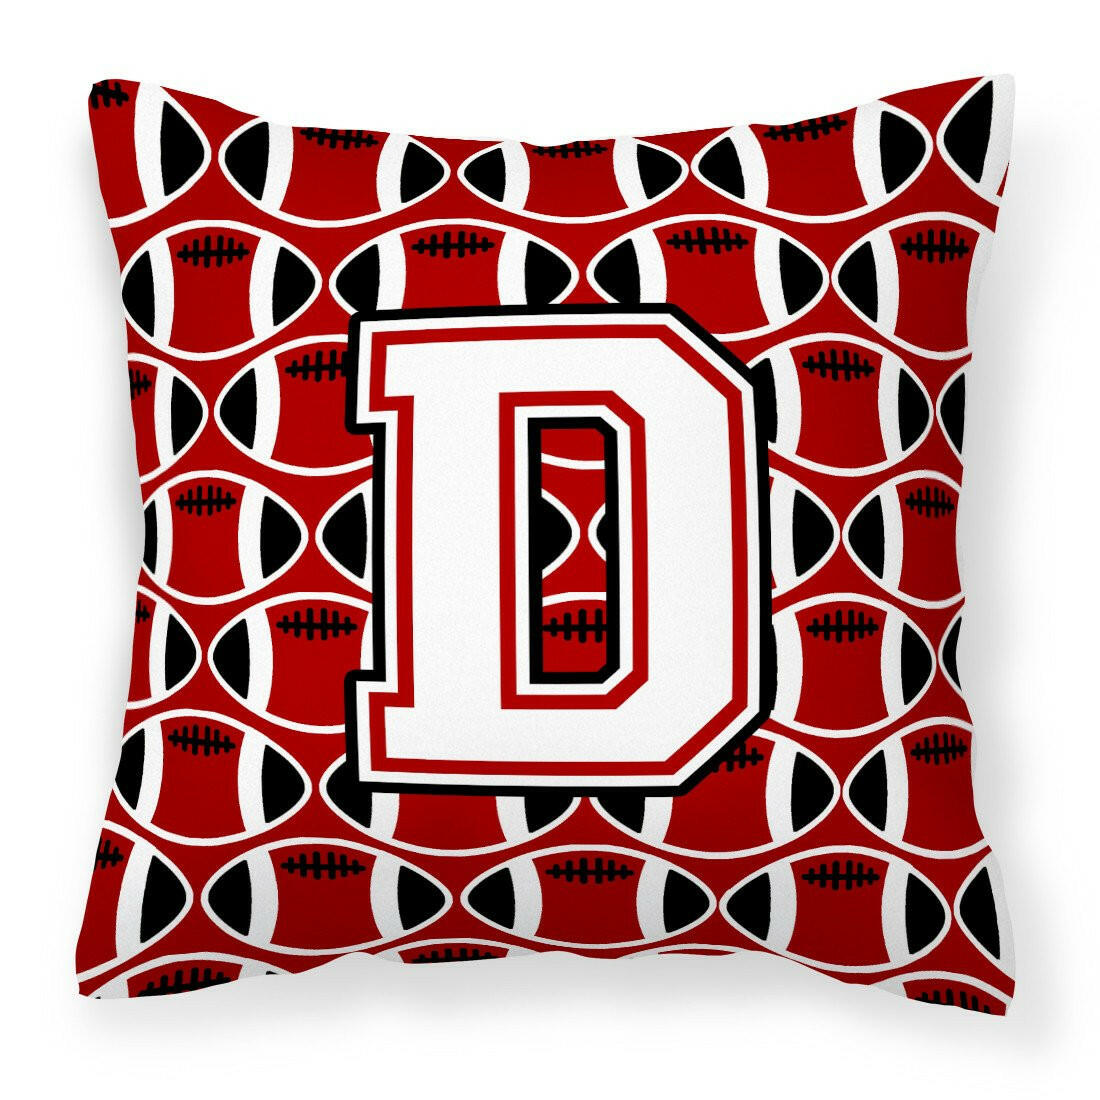 Letter D Football Cardinal and White Fabric Decorative Pillow CJ1082-DPW1414 by Caroline&#39;s Treasures